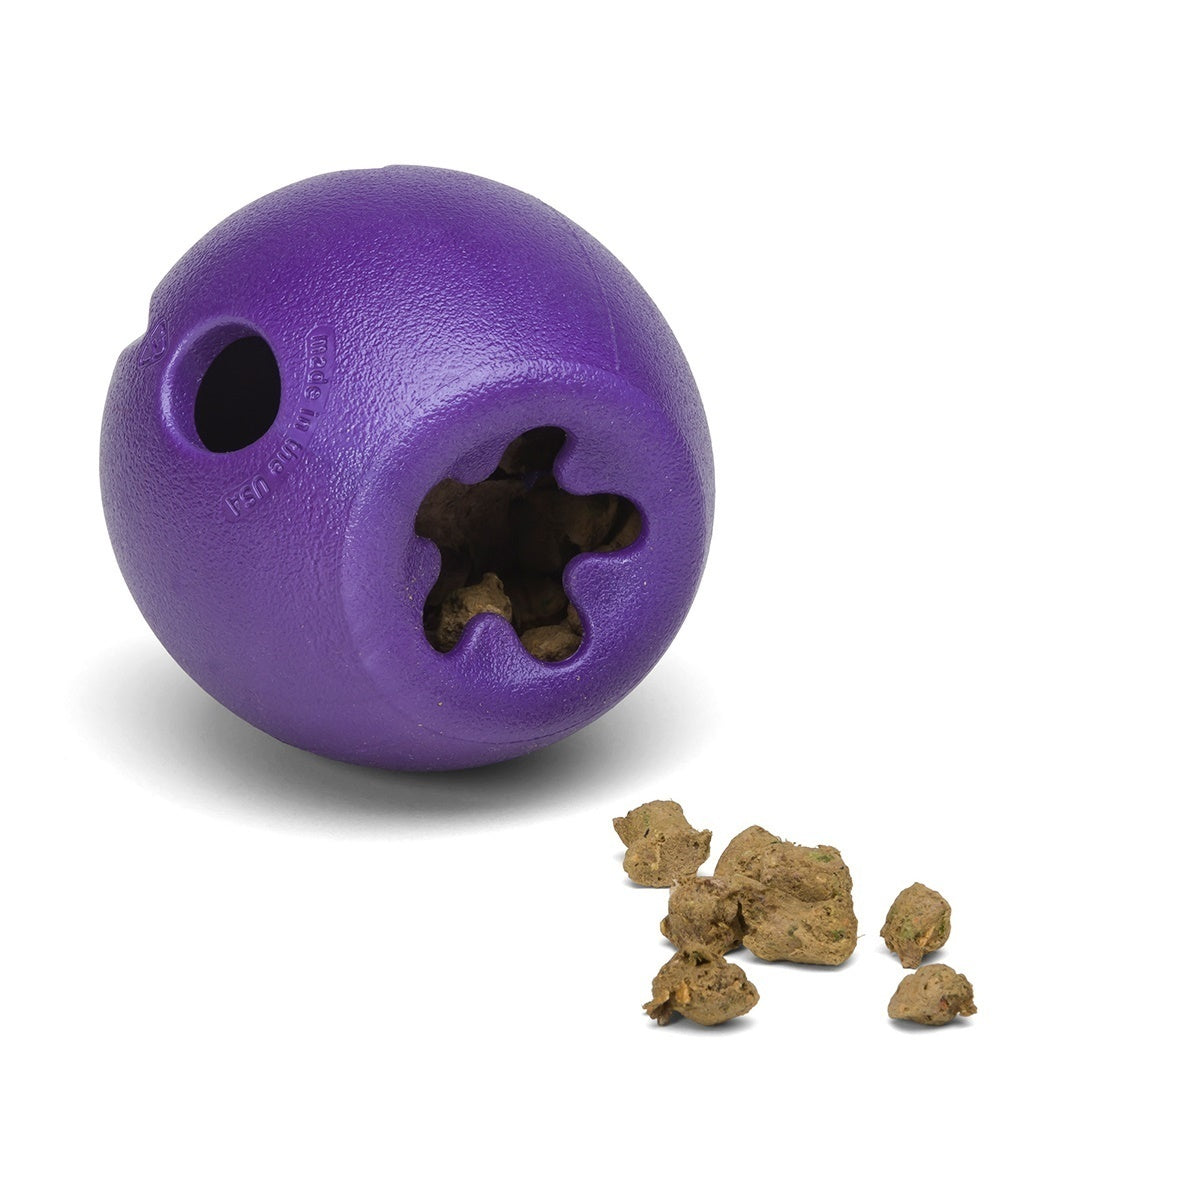 West Paw Rumbl Treat dispenser and slow feeder bowl